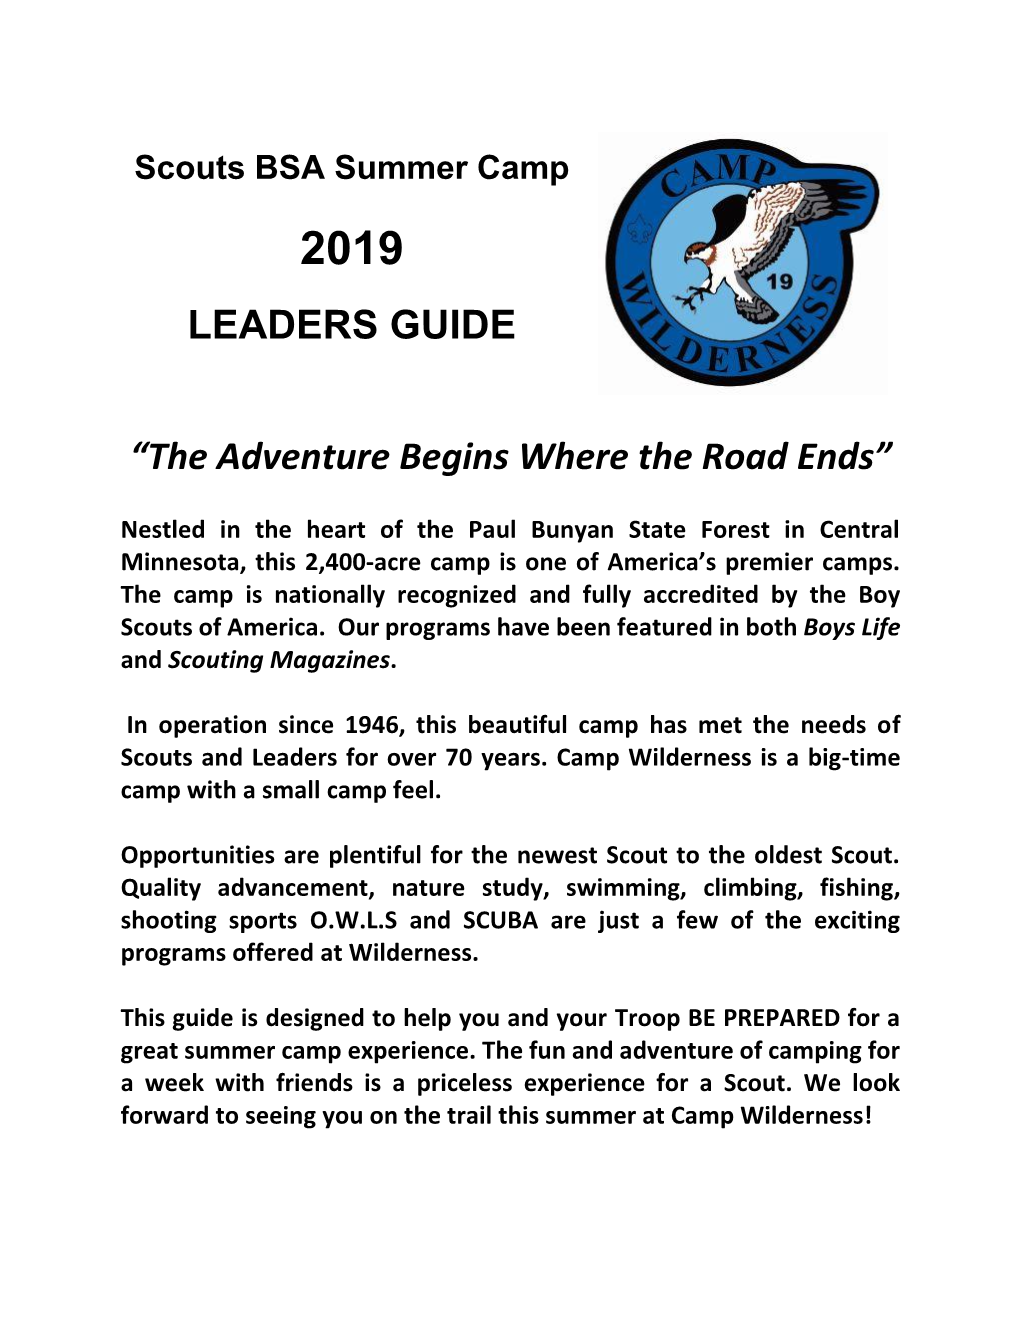 LEADERS GUIDE “The Adventure Begins Where the Road Ends”